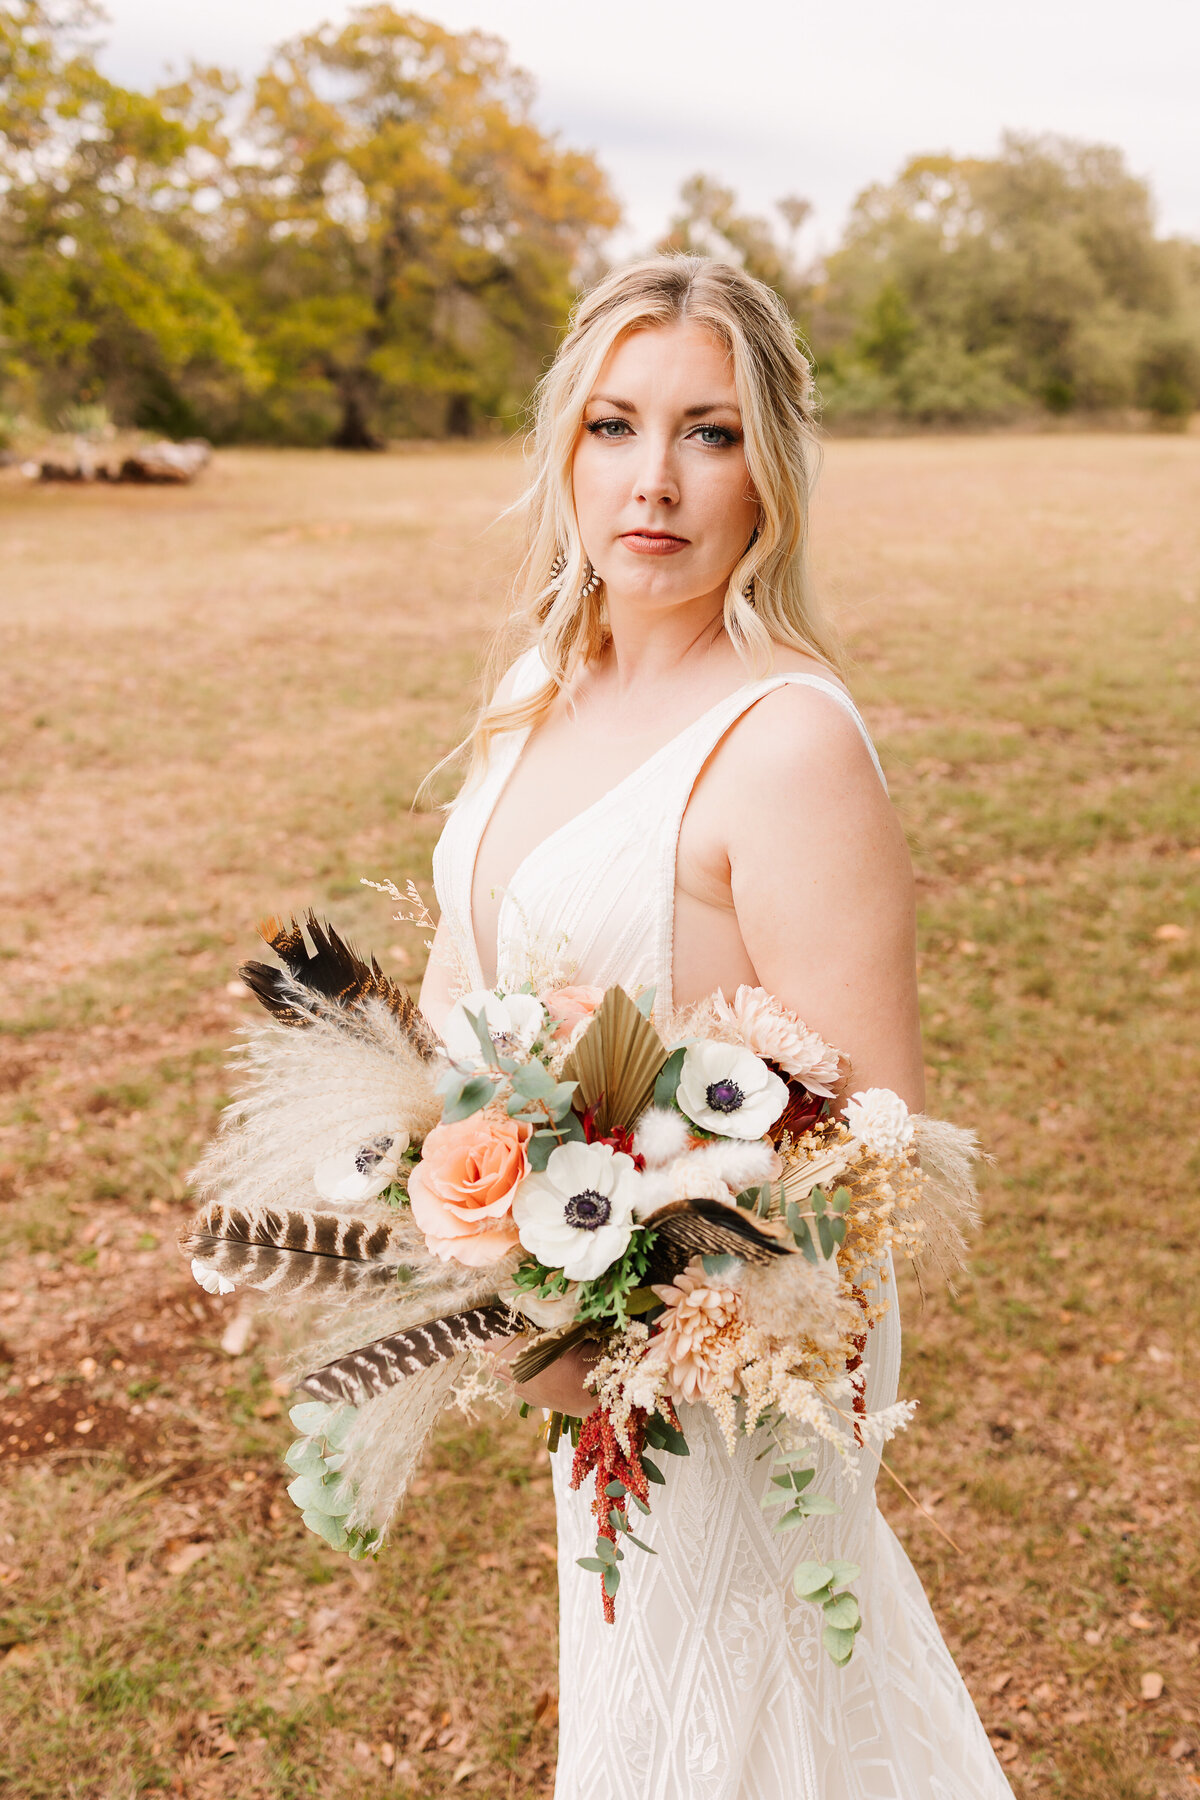 Find bliss in untraditional love at Vista West Ranch. A boho chic party wedding in Dripping Springs, Texas, where love is celebrated with epic parties, colors, and texture.